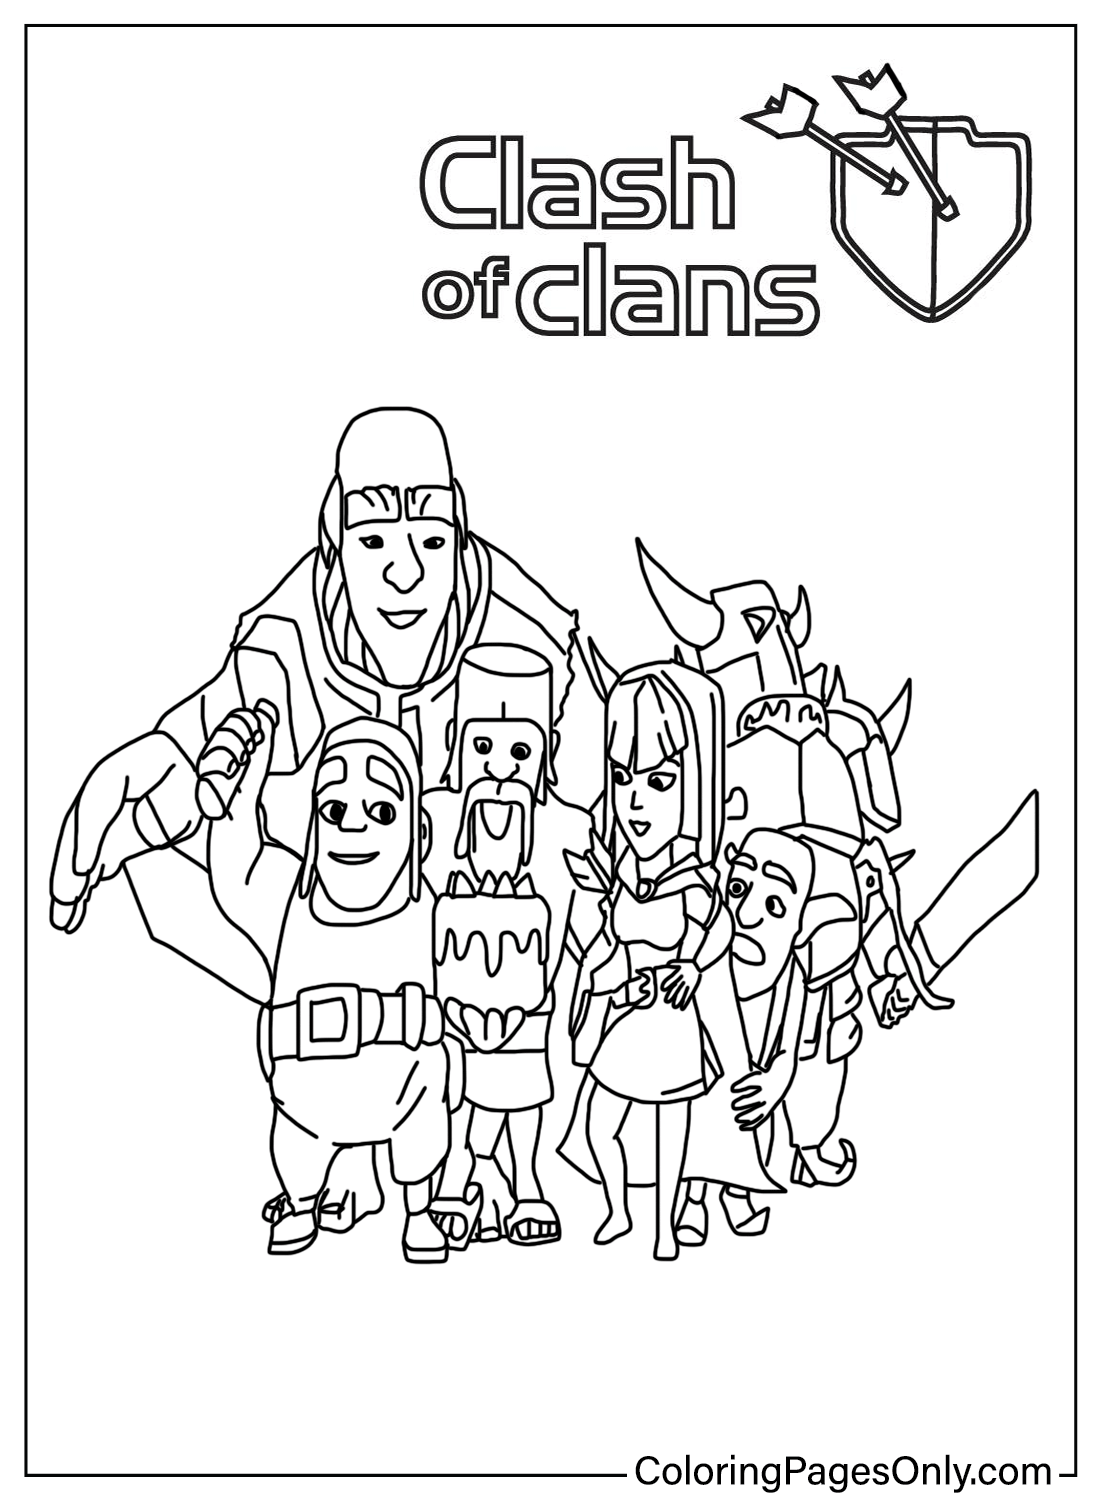 30 Free Printable Clash of Clans Coloring Pages